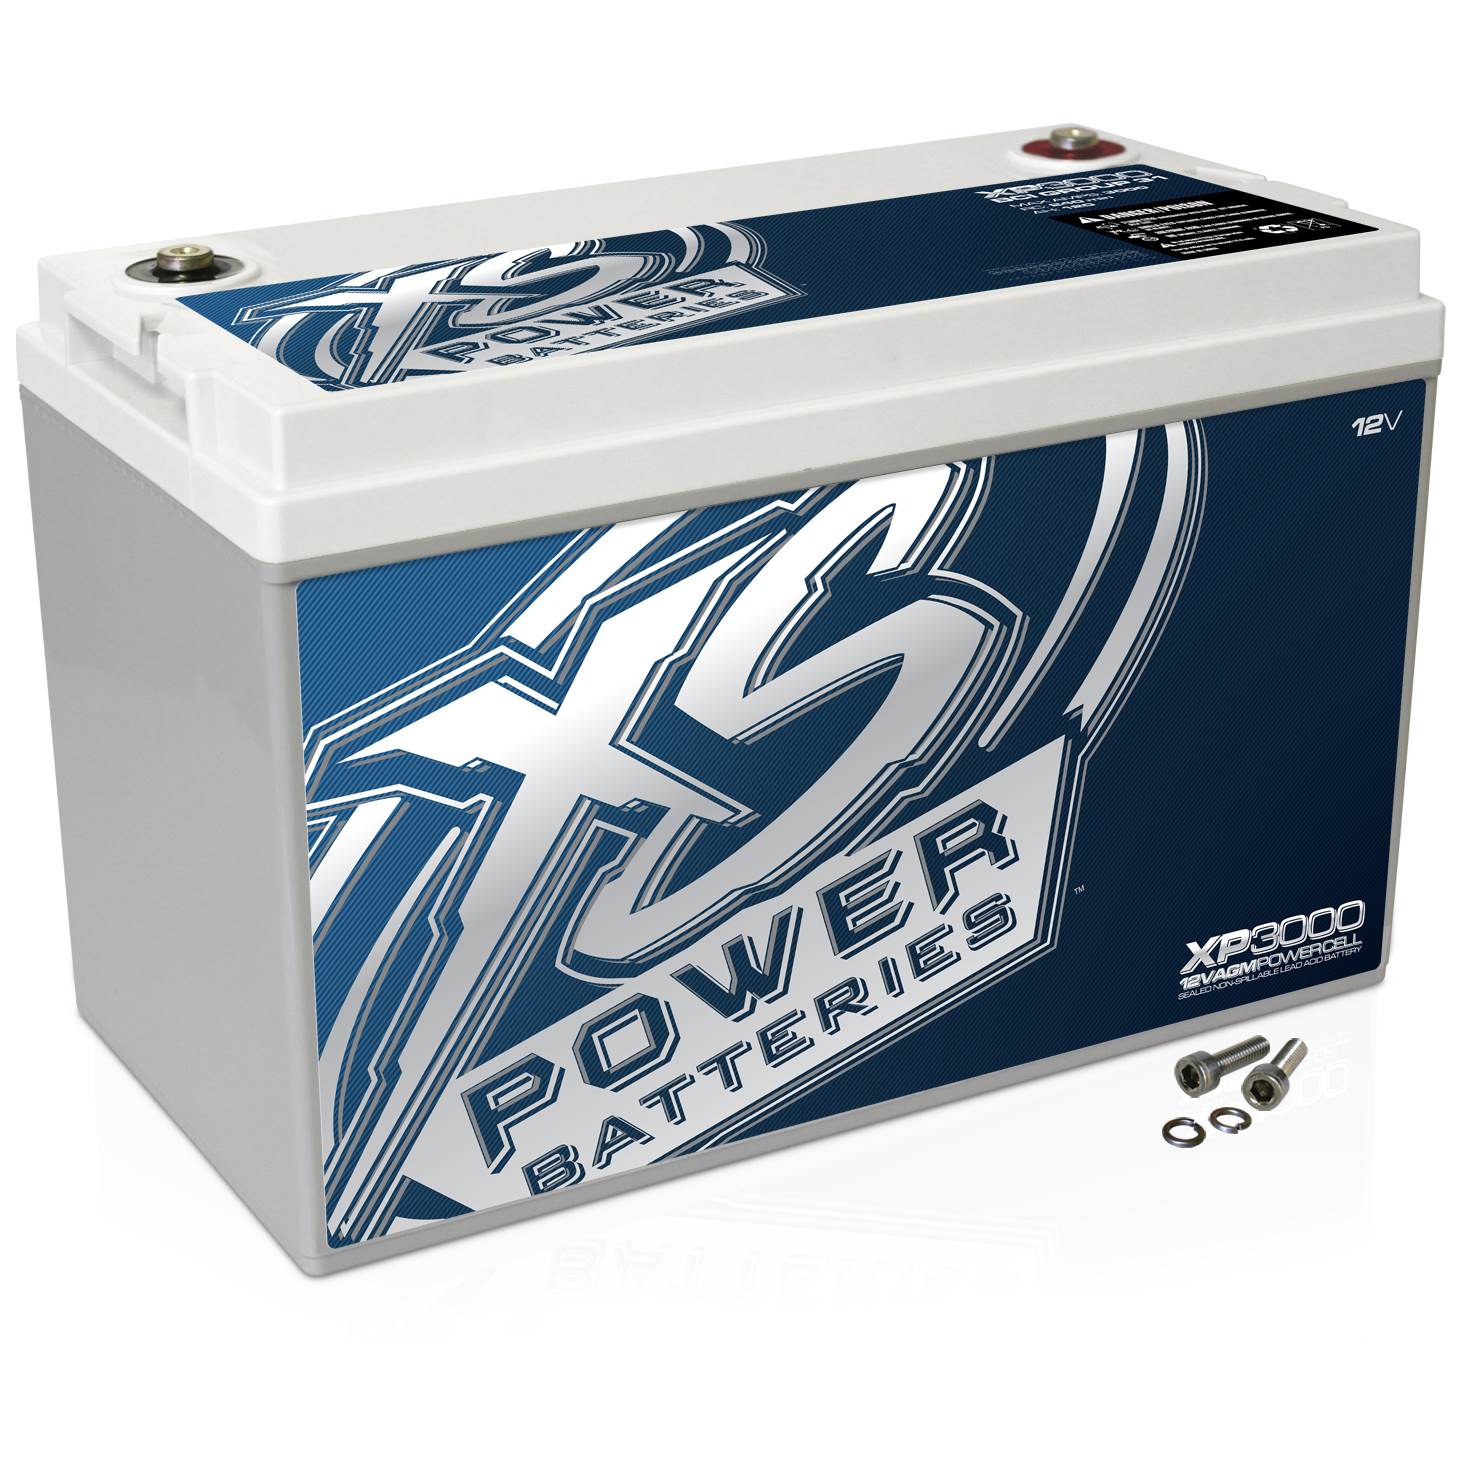 XS Power XP Series 12V BCI Group 31 AGM Car Battery with Terminal Bolt XP3000 - image 1 of 5